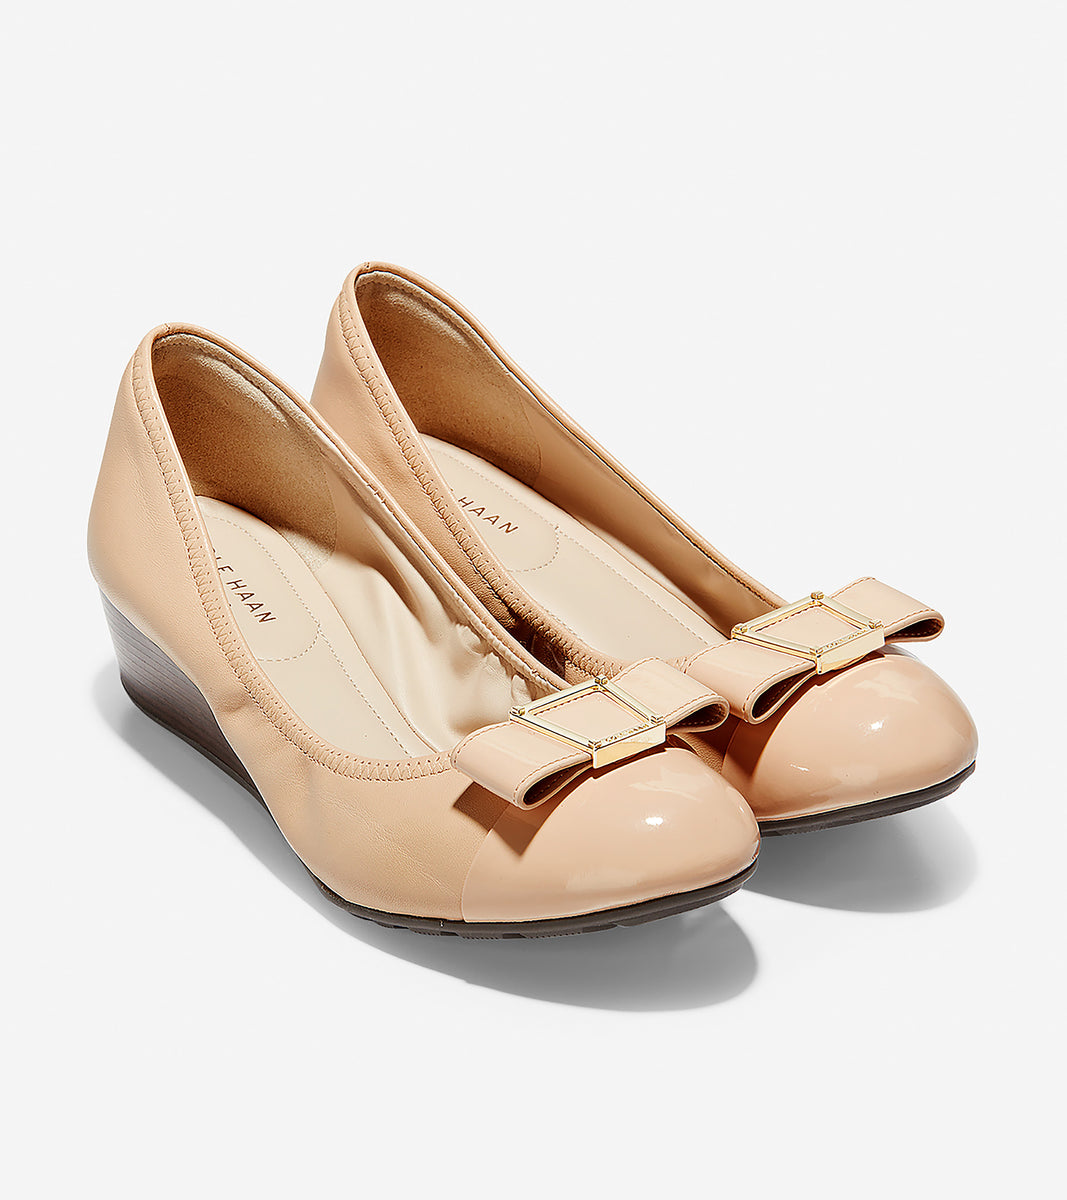 ColeHaan-Emory Bow Wedge-w09951-Nude Leather